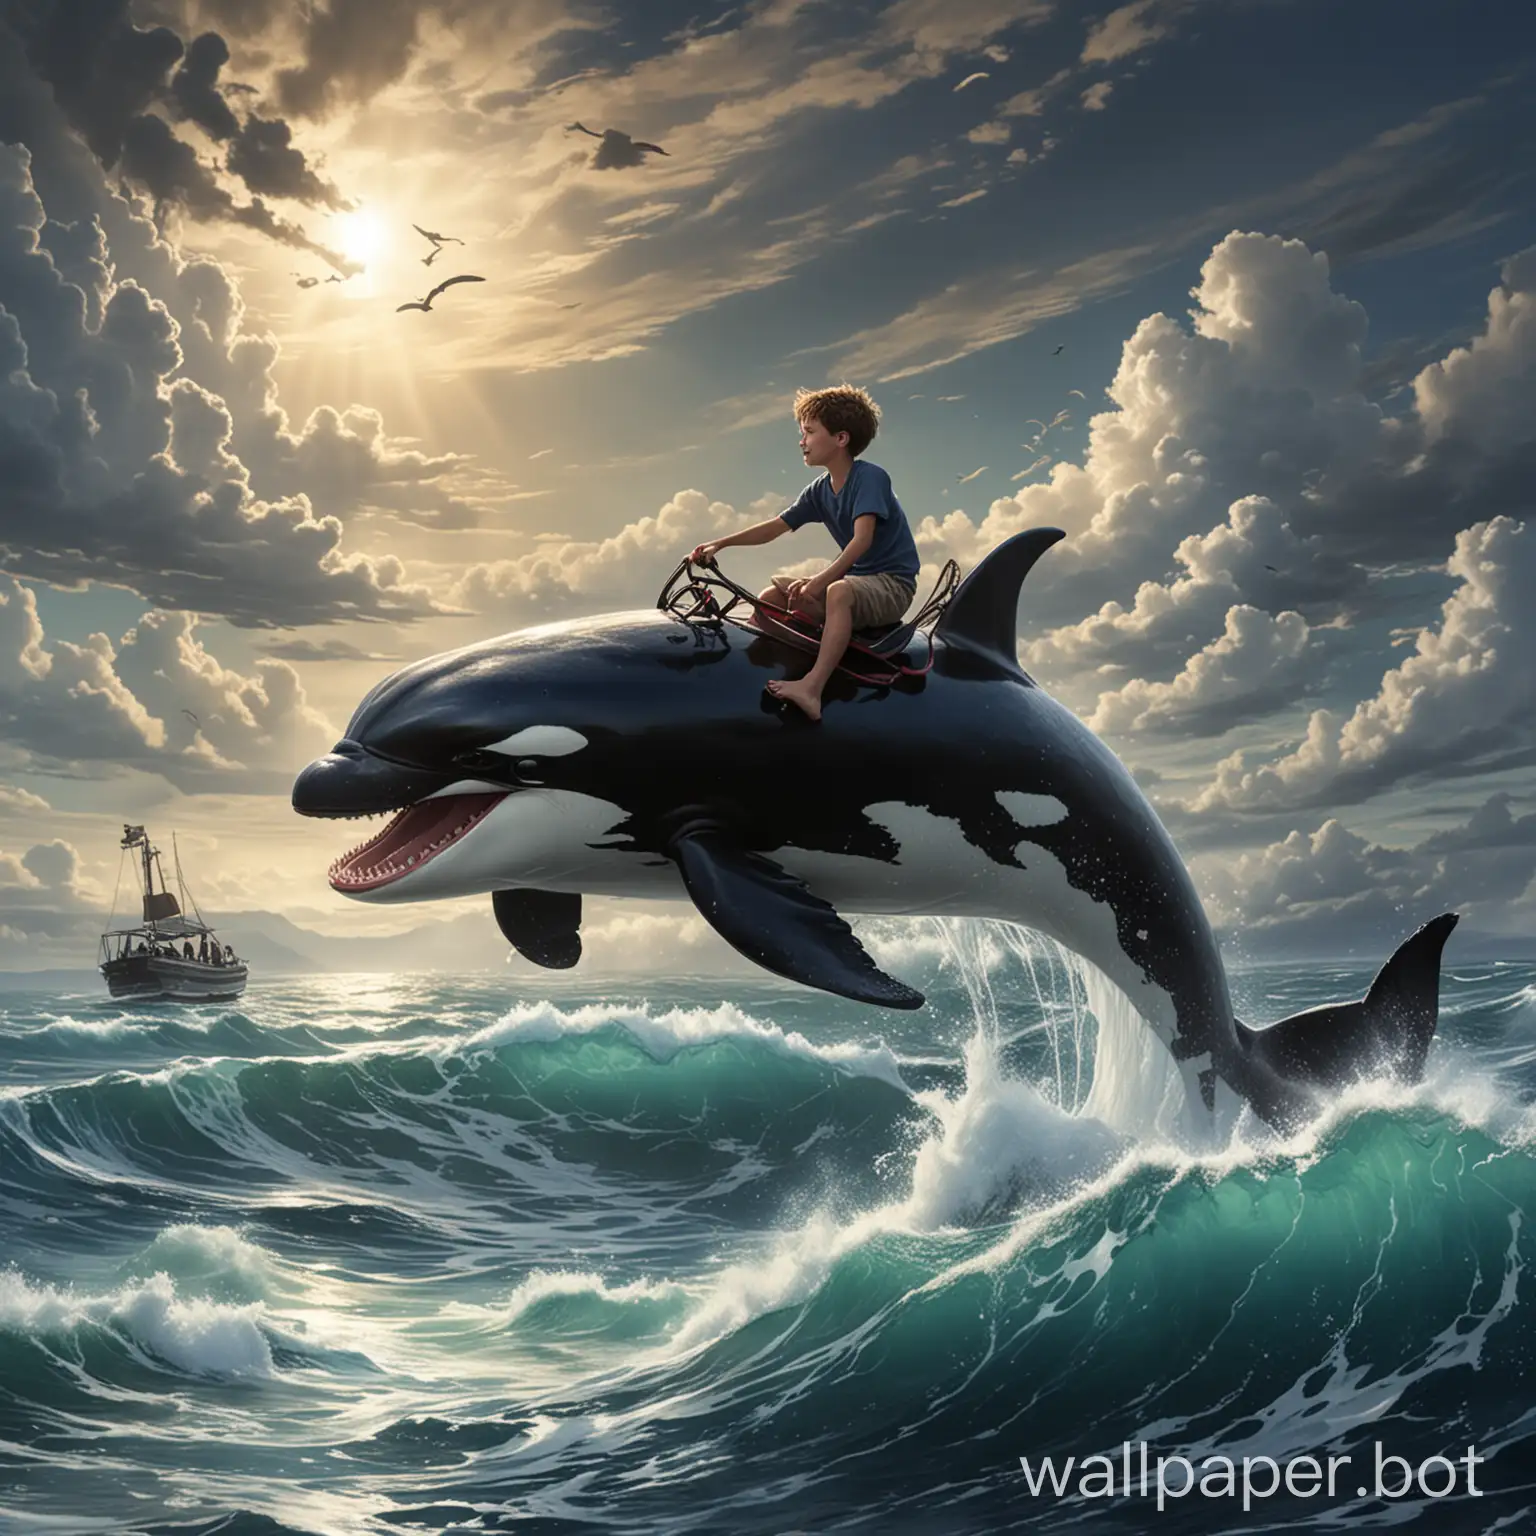 A boy sits on a killer whale riding the wind and waves